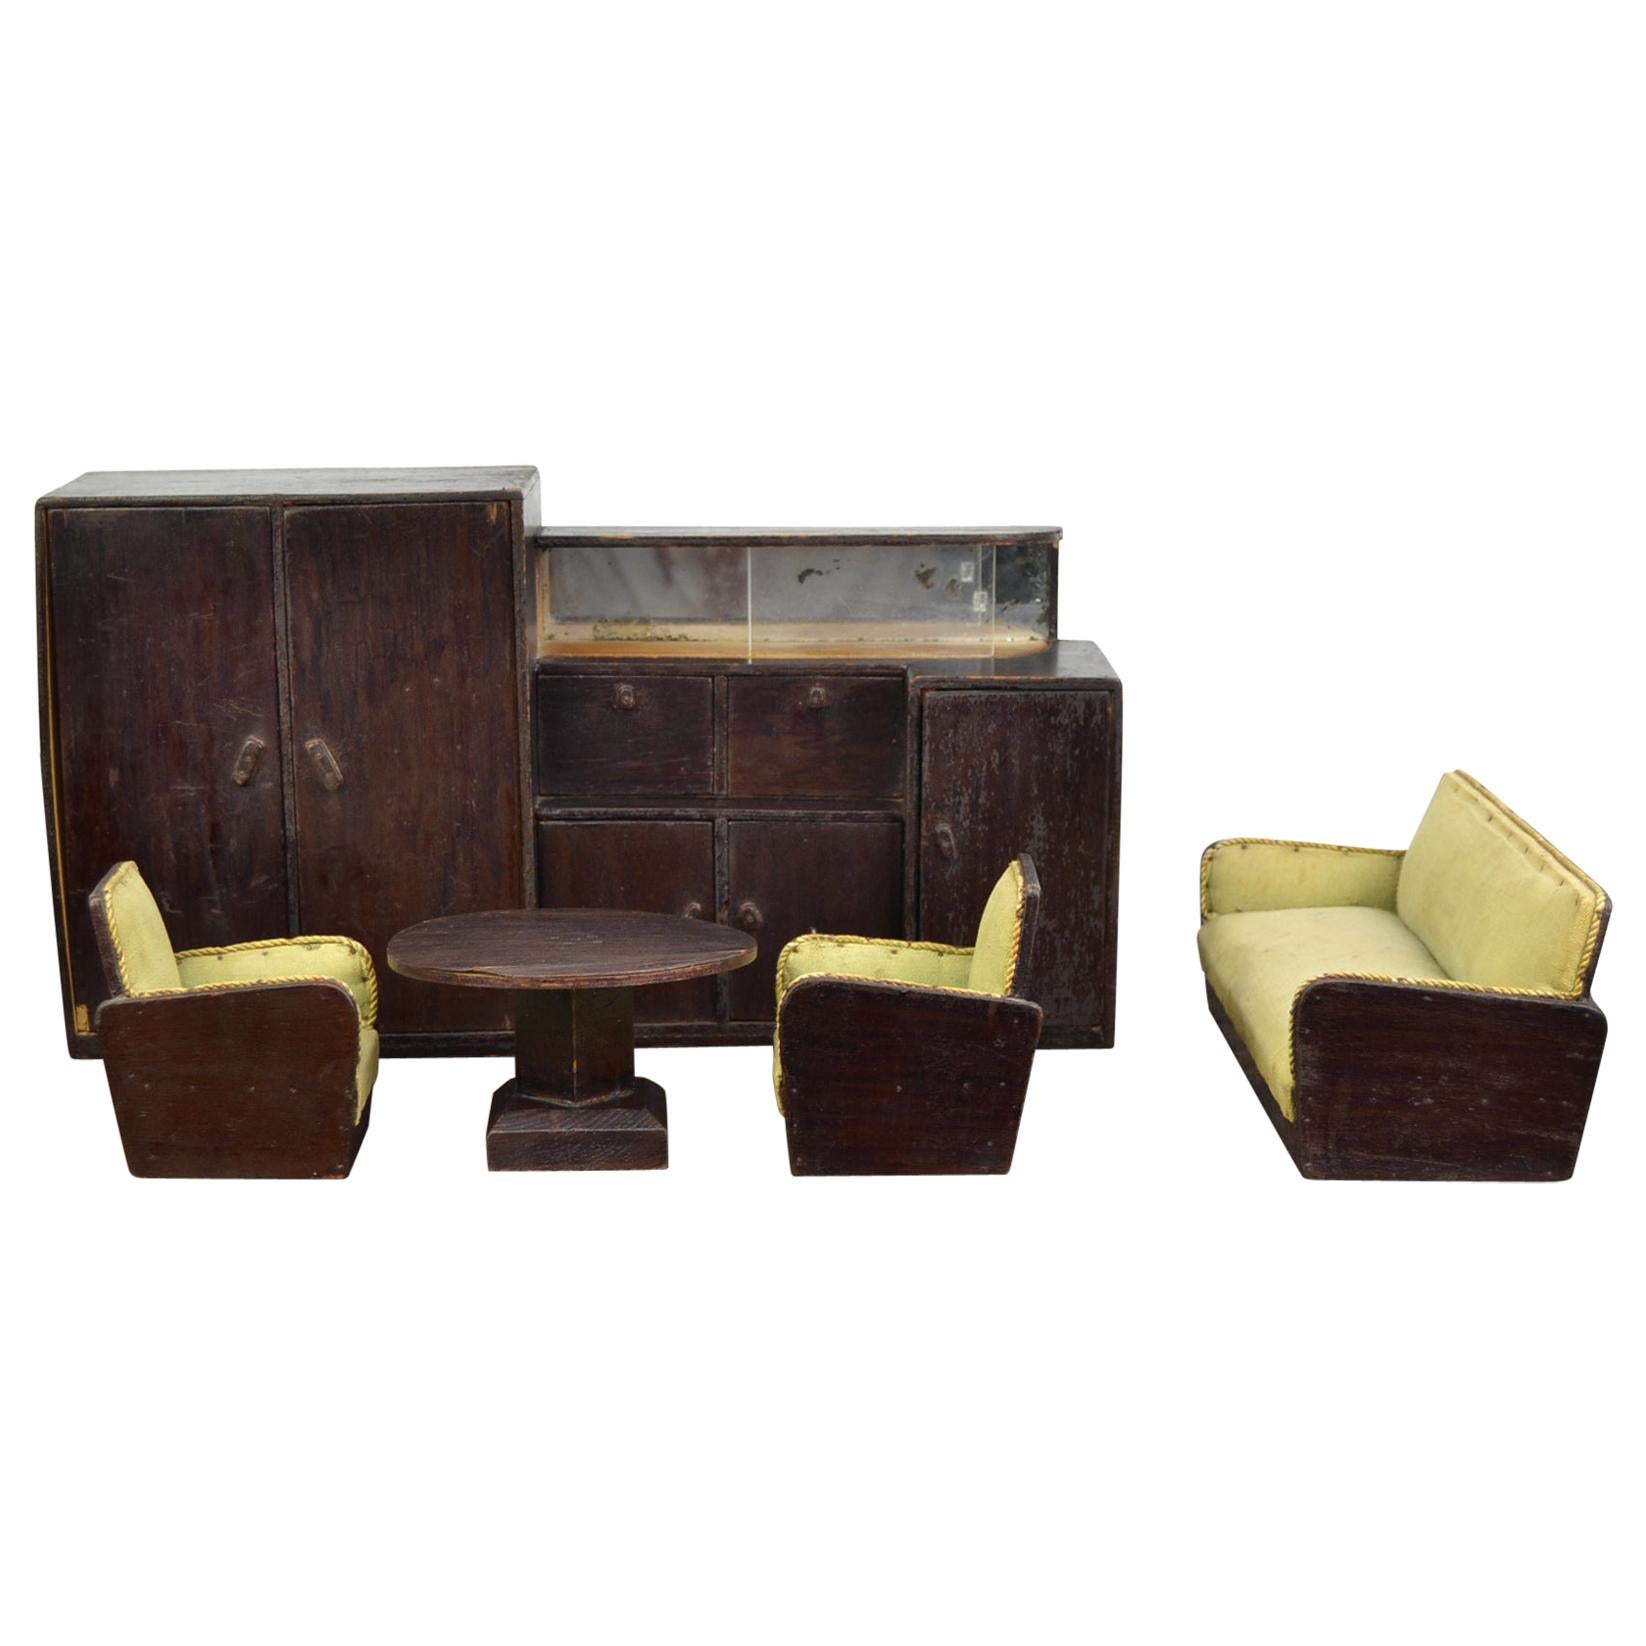 Miniature Art Deco Furniture, Club Chairs, Coffee Table, Seat and Cabinet